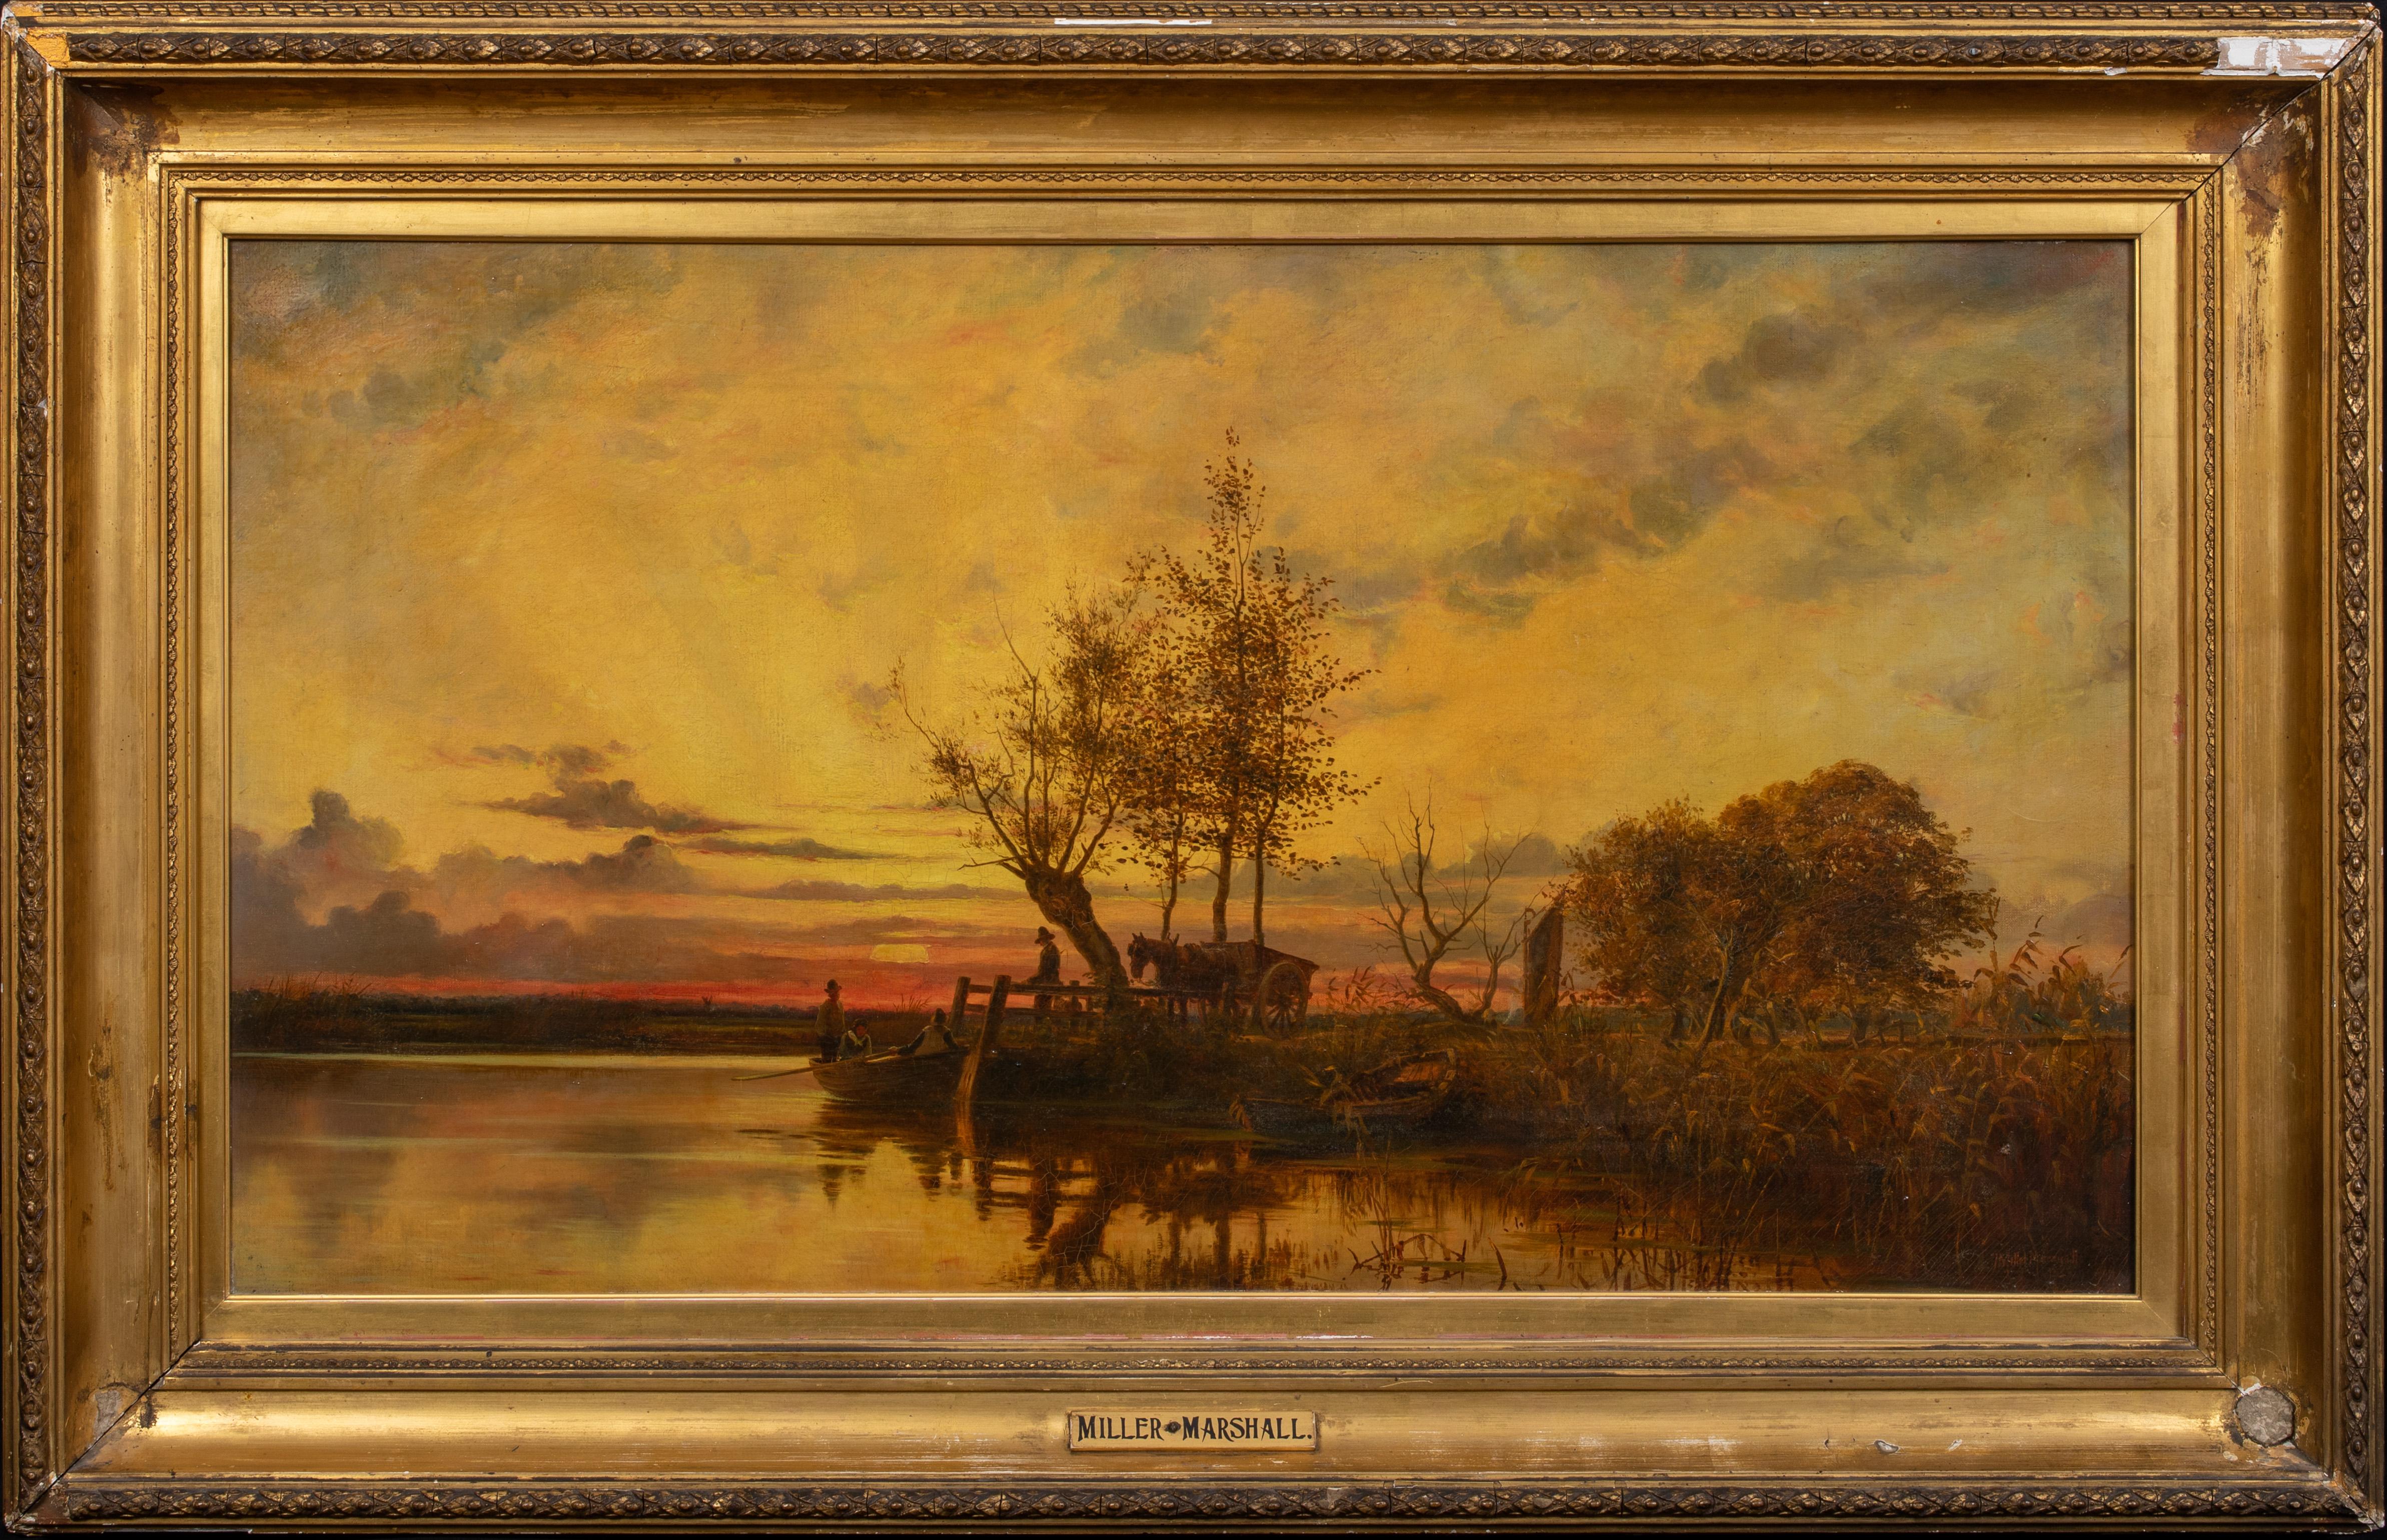 Unknown Portrait Painting - The Ferry Crossing At Sunset, Norfolk, 19th Century MILLER MARSHALL